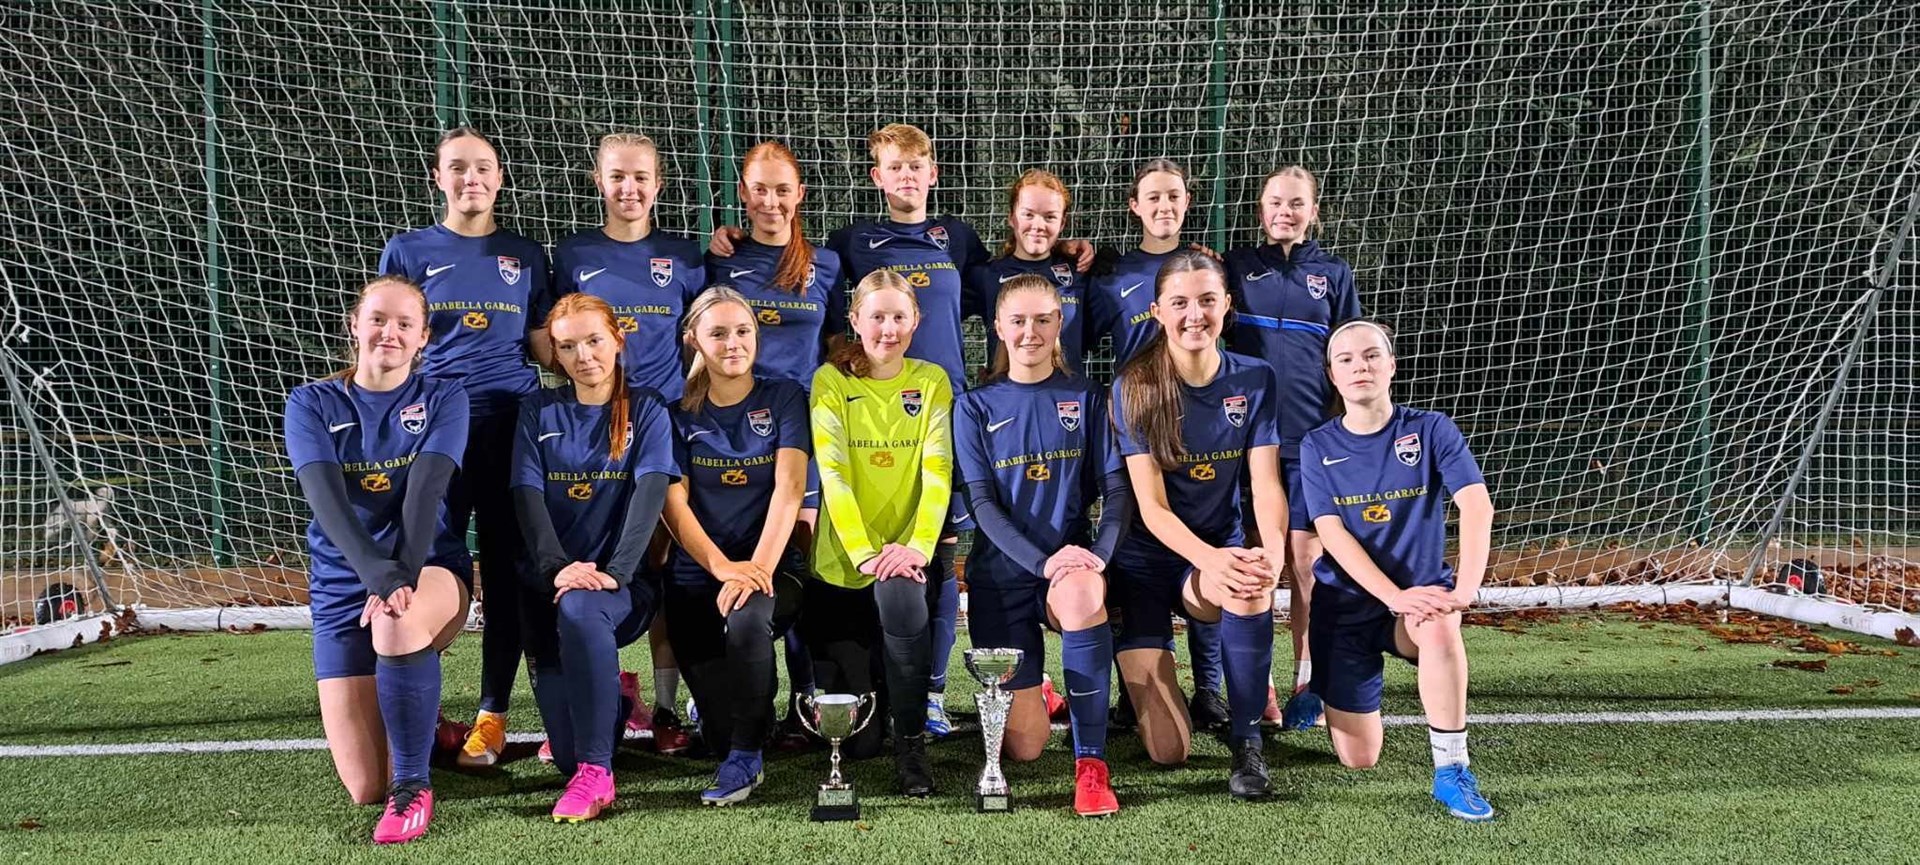 Ross County's under-16 girls went through the entire 2023 season unbeaten on their way to winning the North of Scotland League.